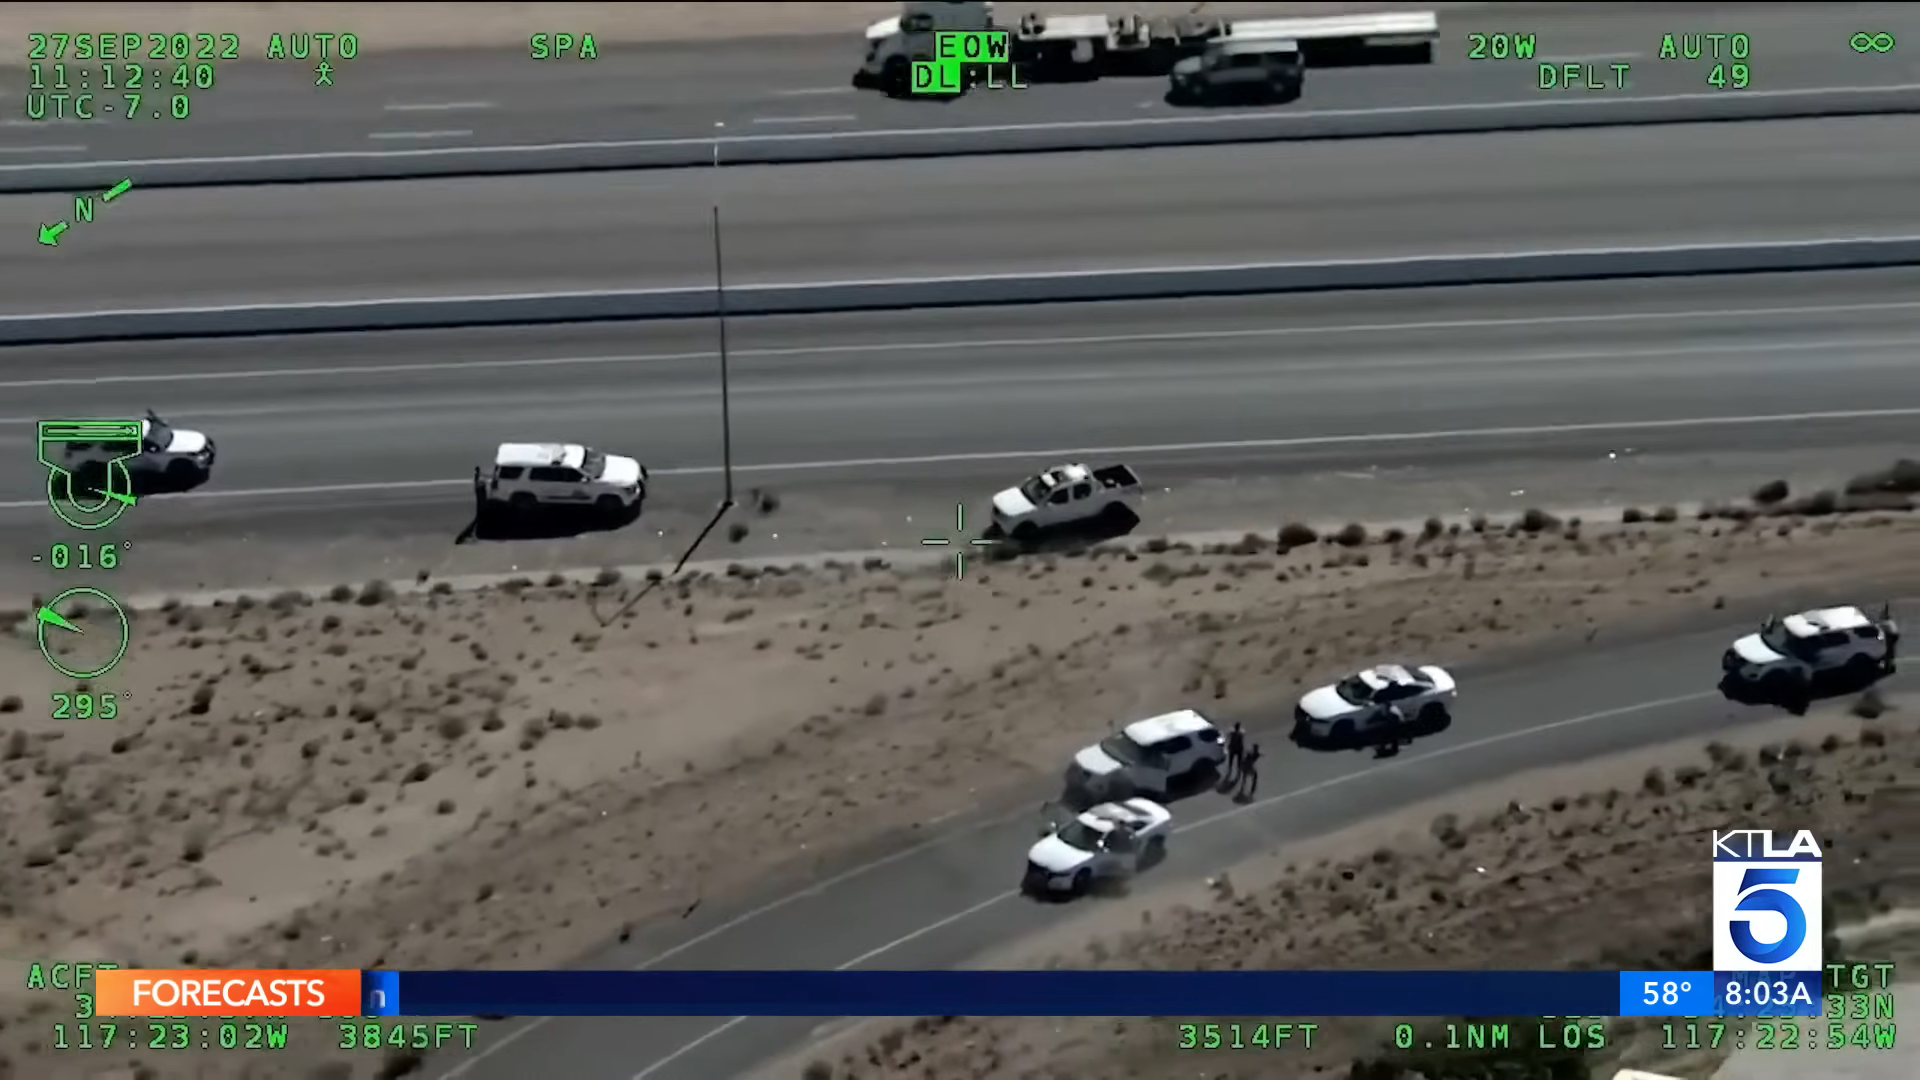 News chopper view of a high-speed chase with multiple police cars pursuing a vehicle on a highway